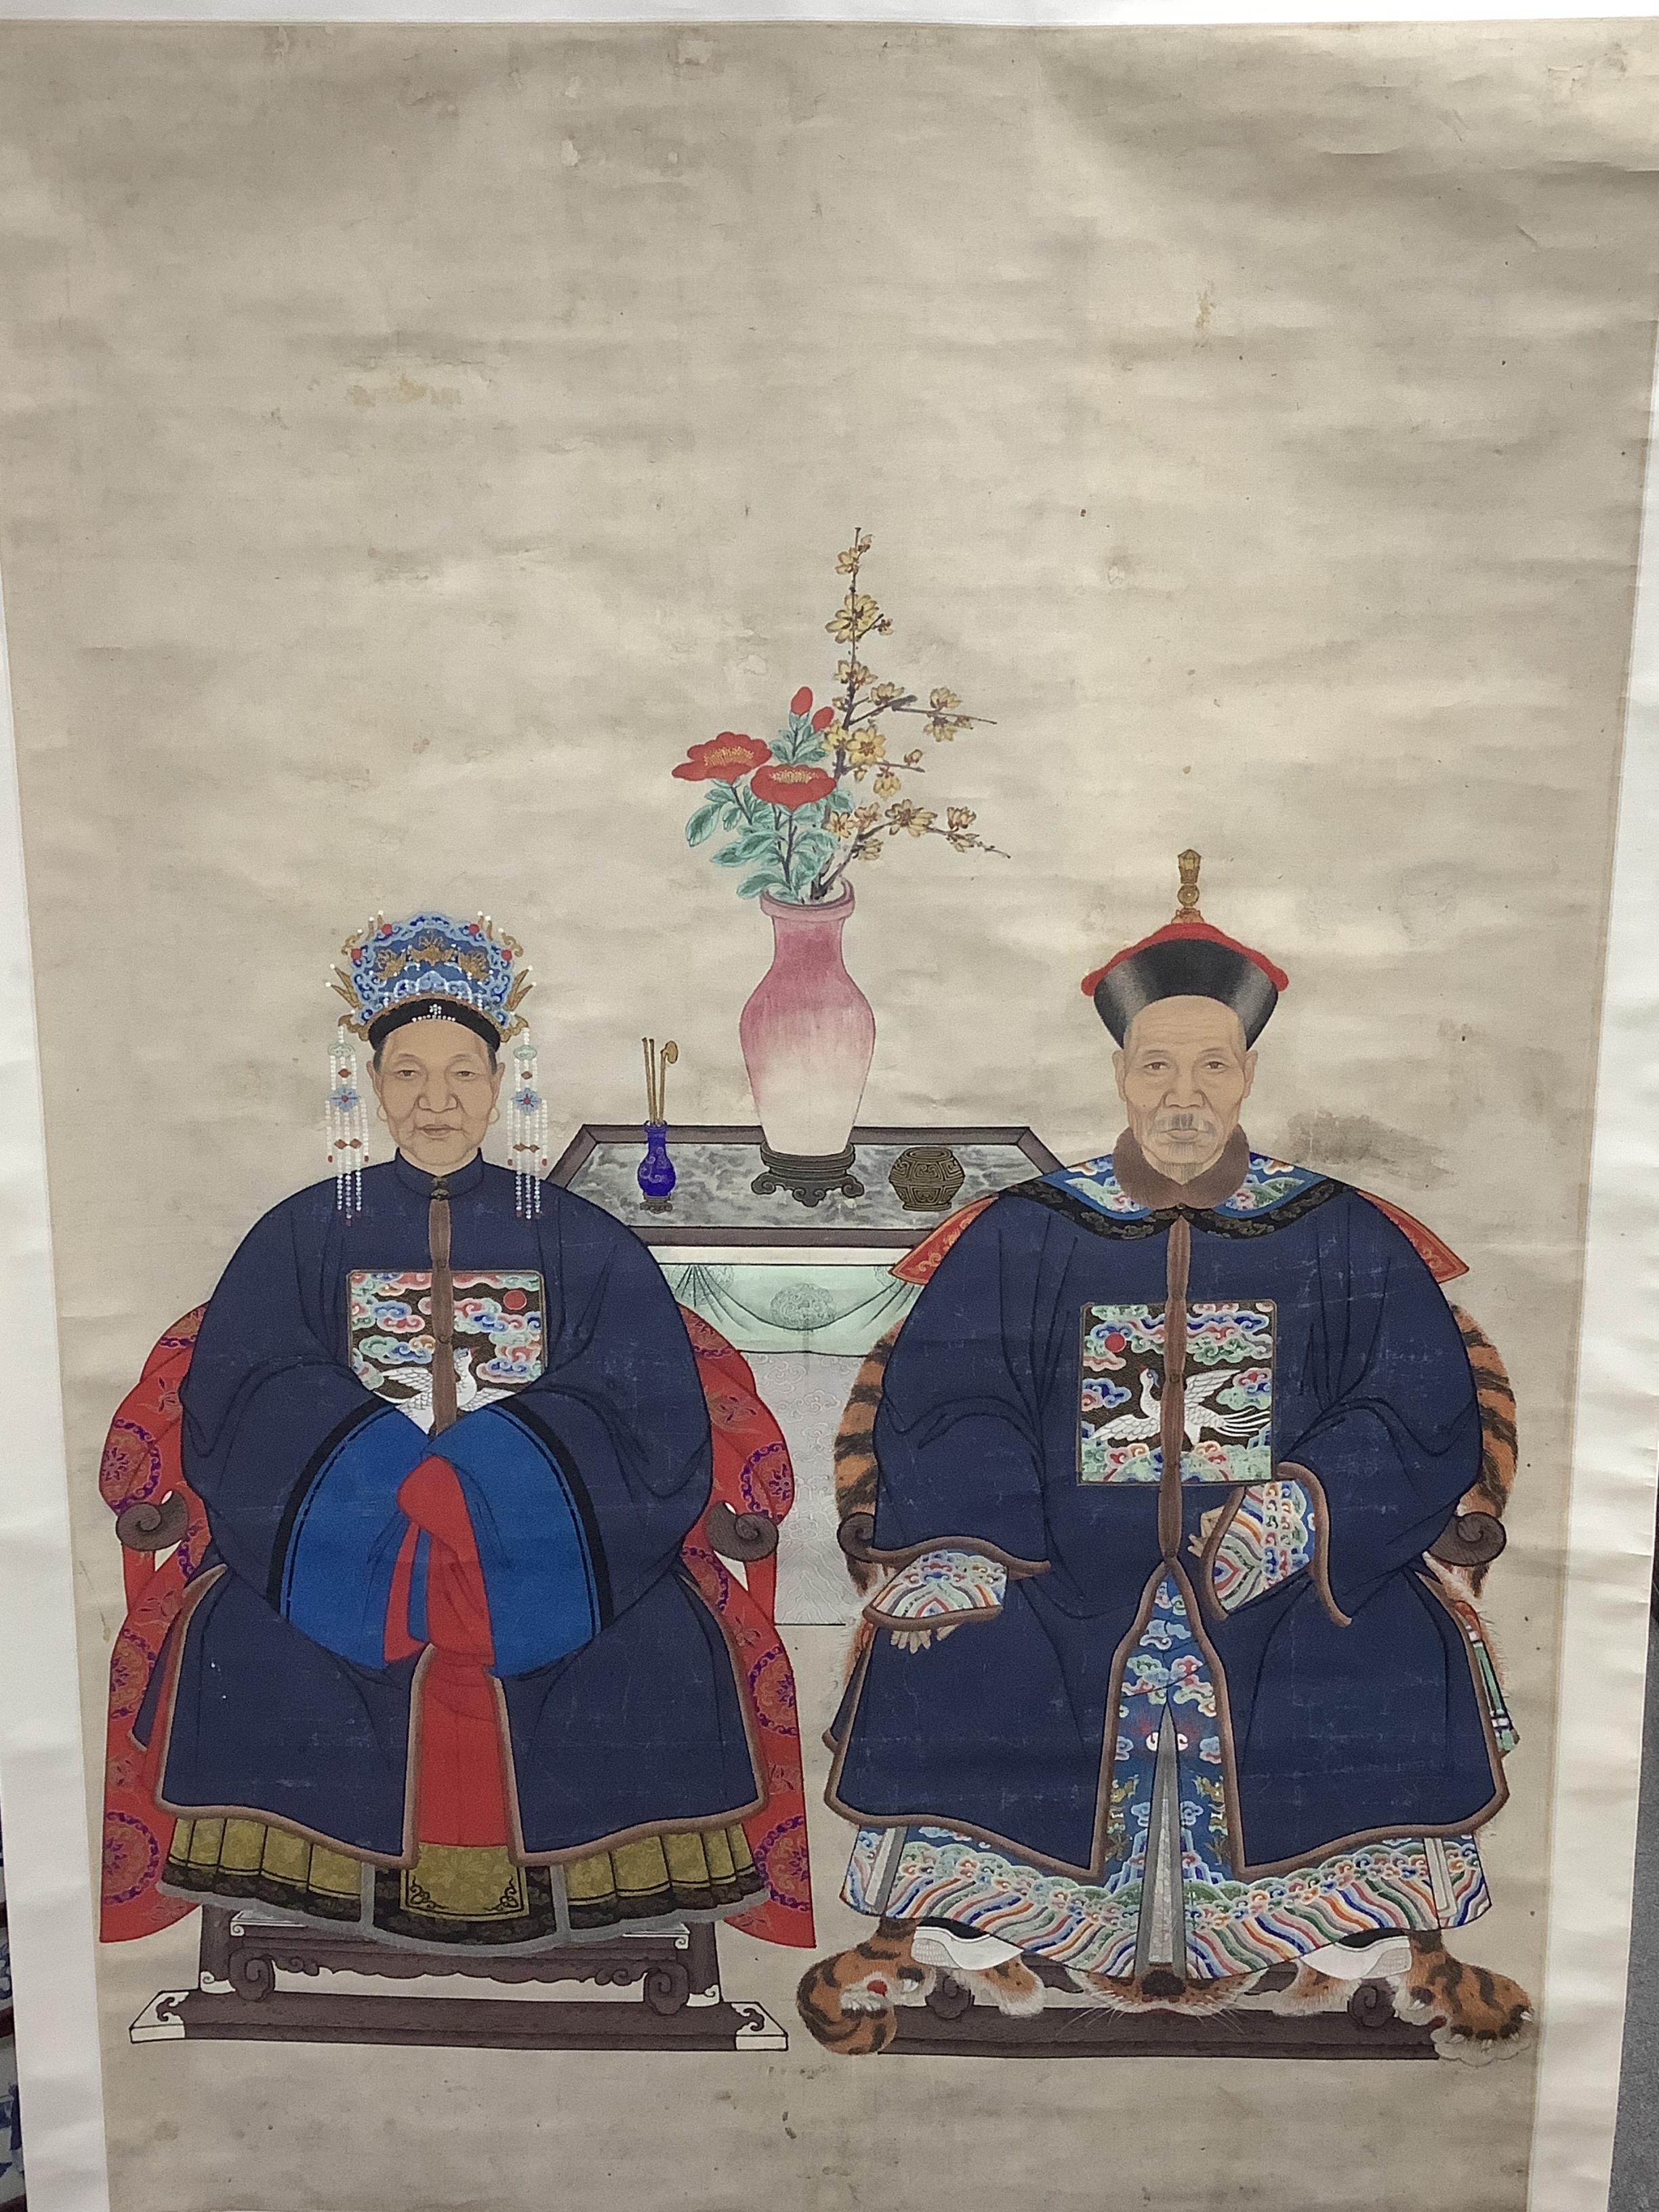 A Chinese ancestor scroll painting on paper, late Qing dynasty, depicting a husband and wife, wearing formal robes, seated on thrones, with a table and scholarly objects behind them, image 132cm x 91cm, later mounted